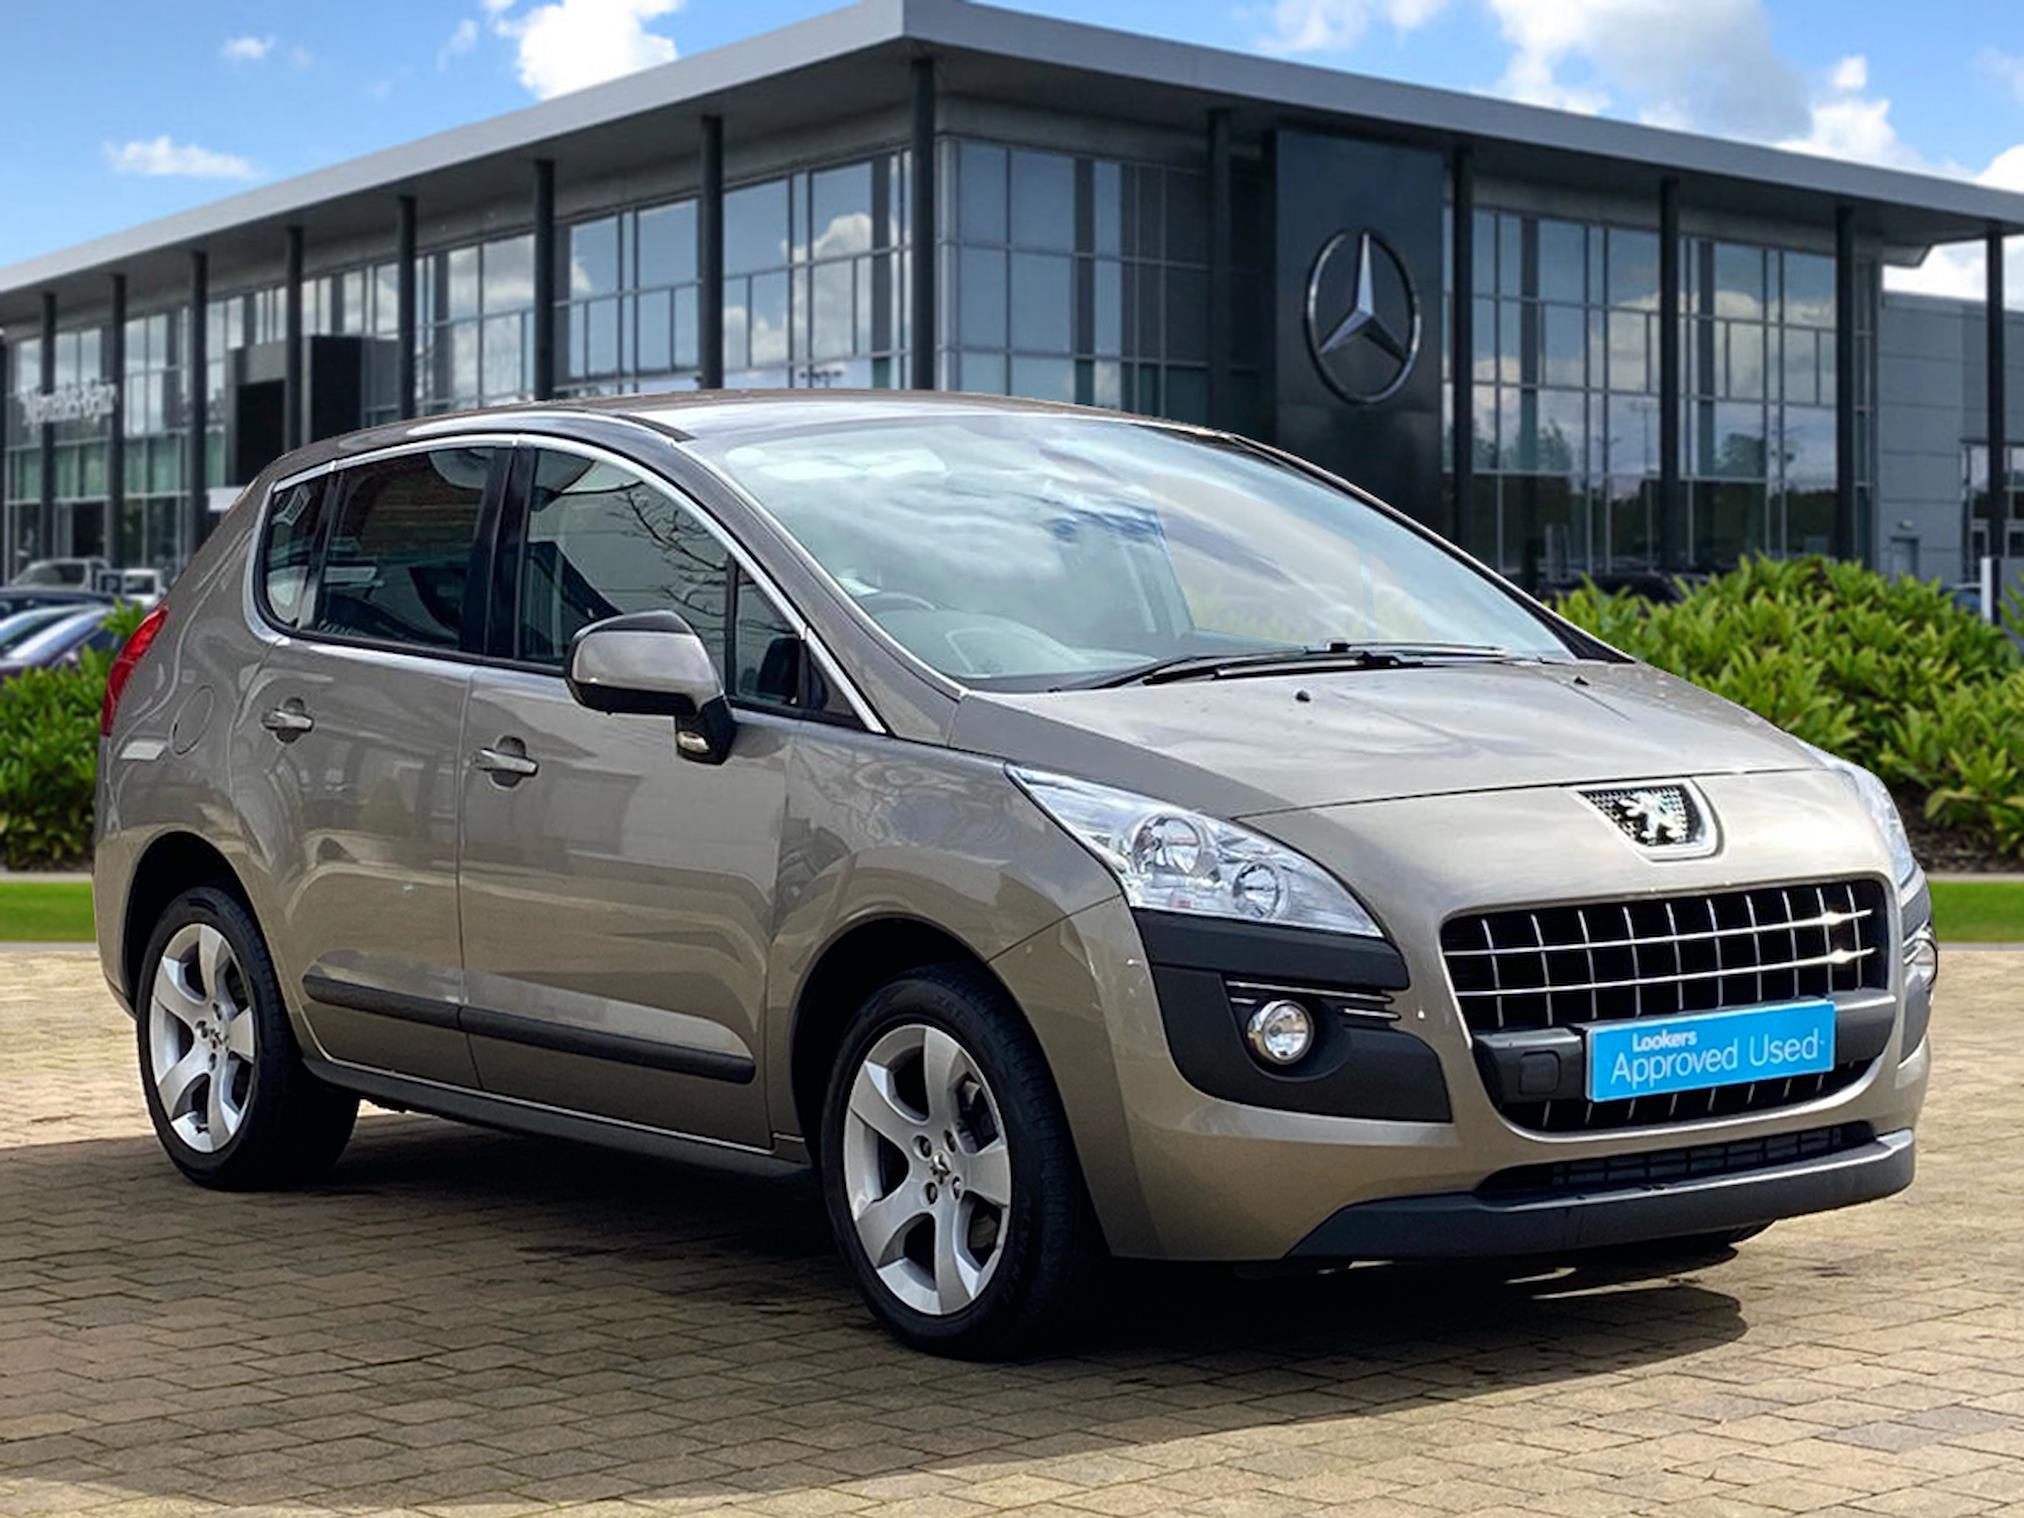 Used PEUGEOT 3008 1.6 E-Hdi 112 Active Ii 5Dr Egc 2012